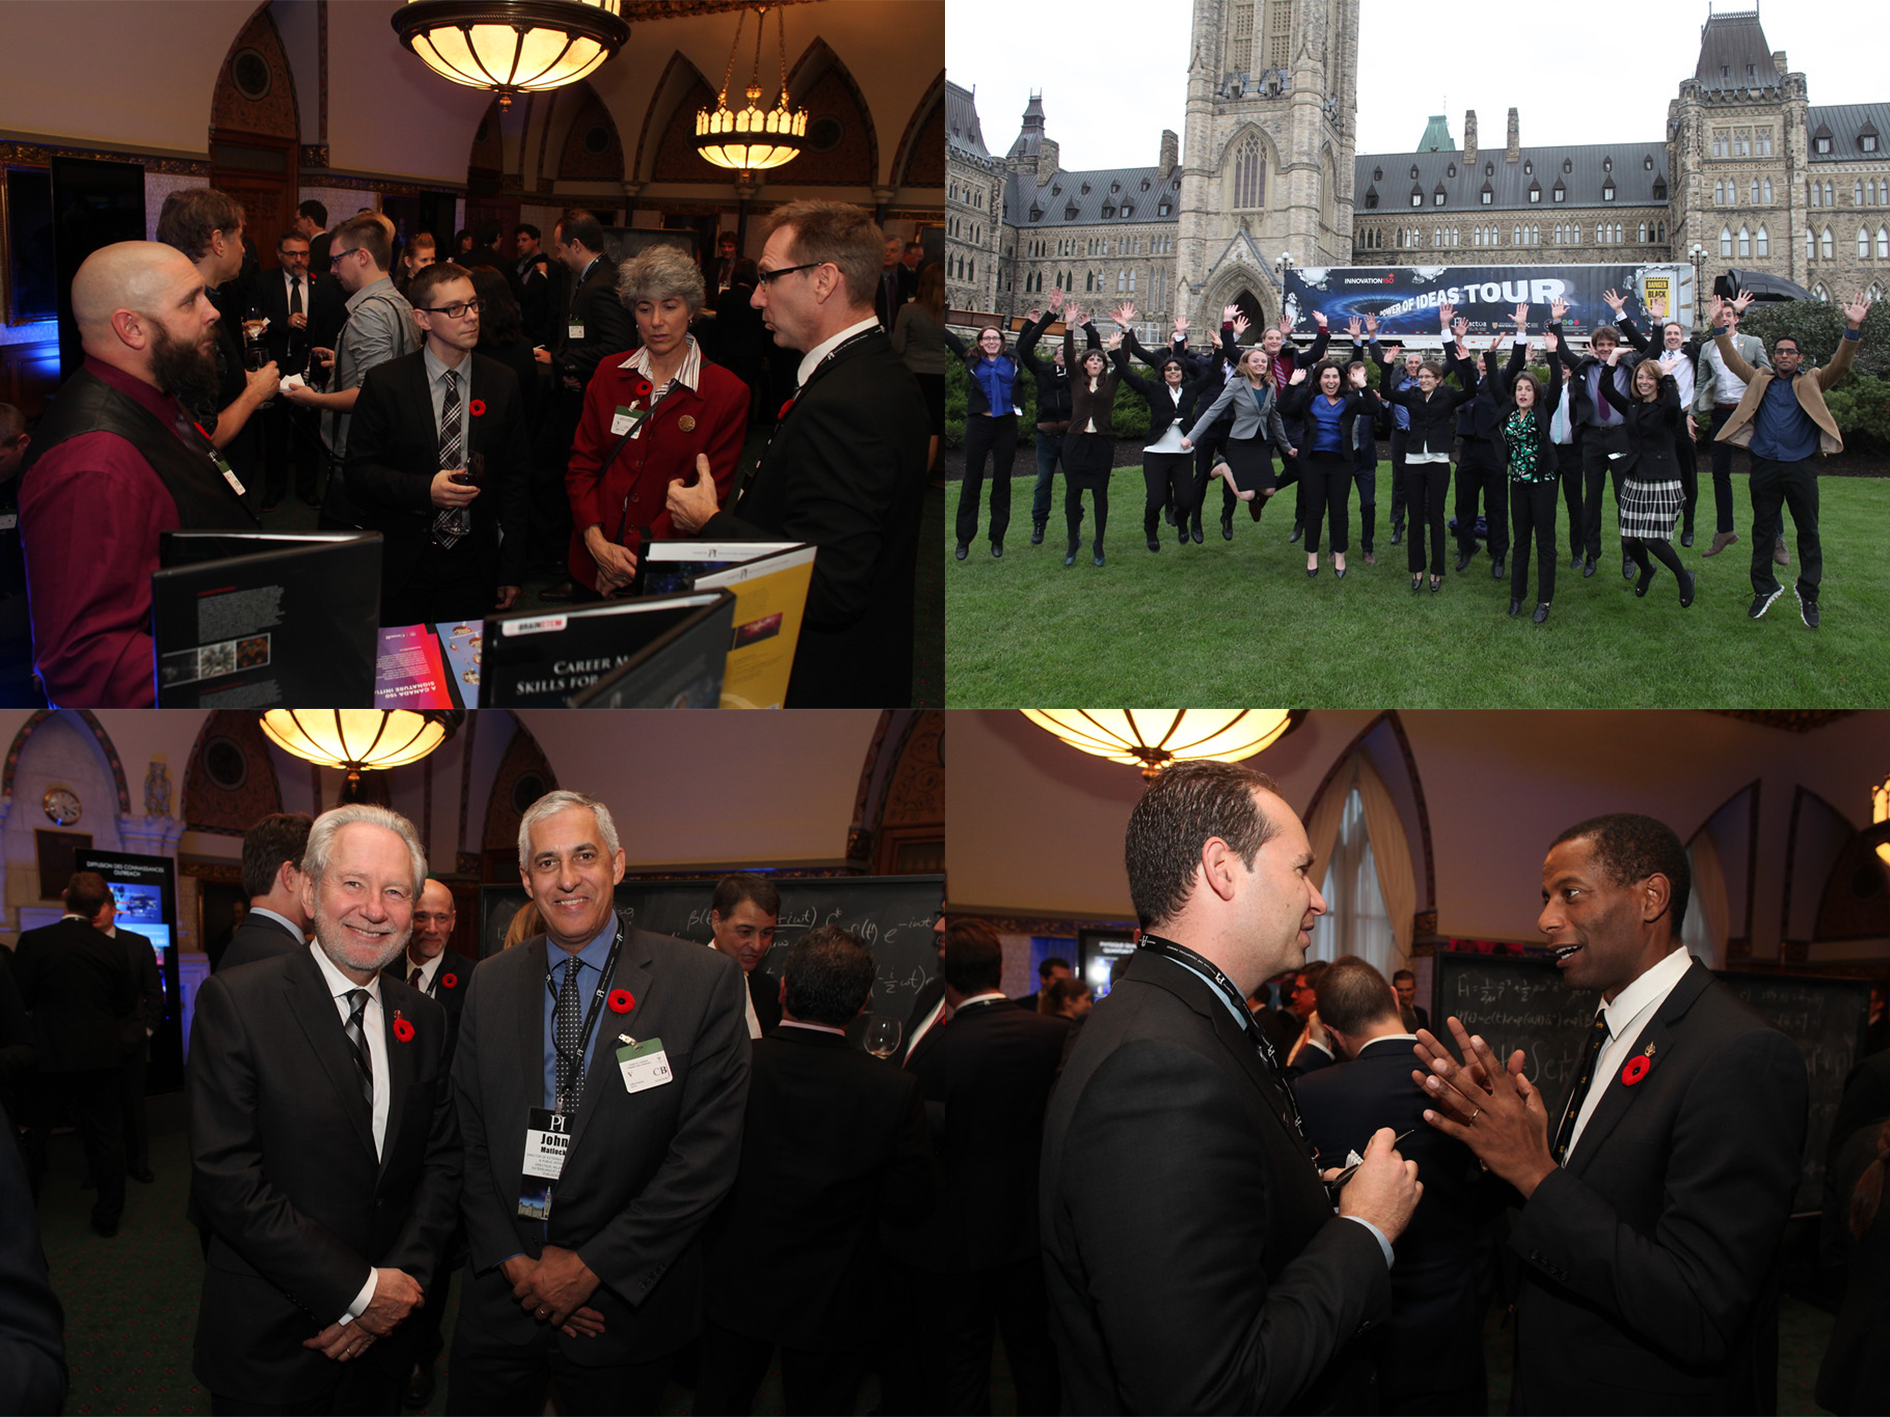 Perimeter's outreach being presented to government officials in Ottawa at Hill day